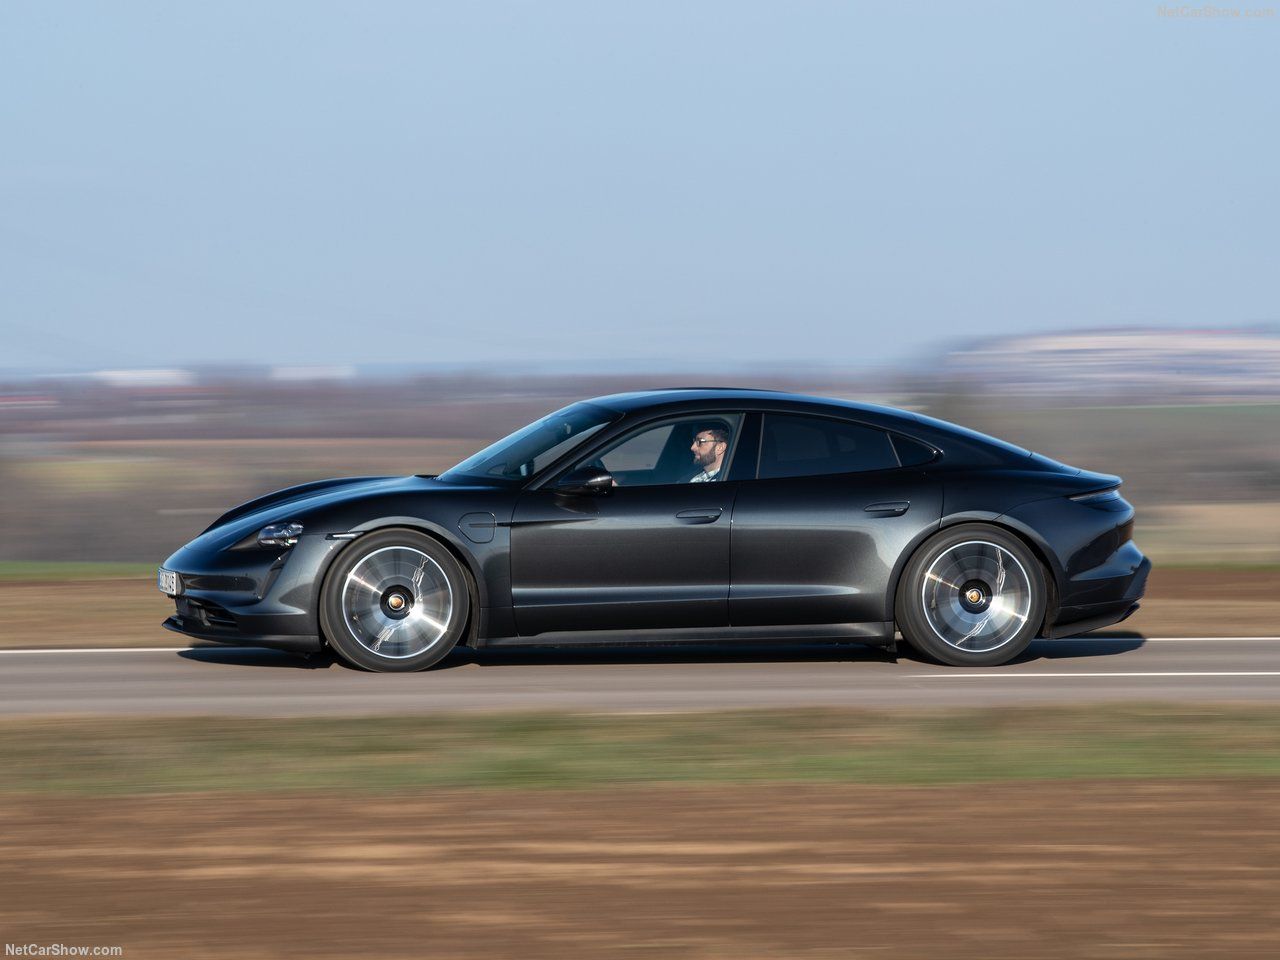 The base Porsche Taycan has rear-wheel drive and an $81,250 price tag - CNET